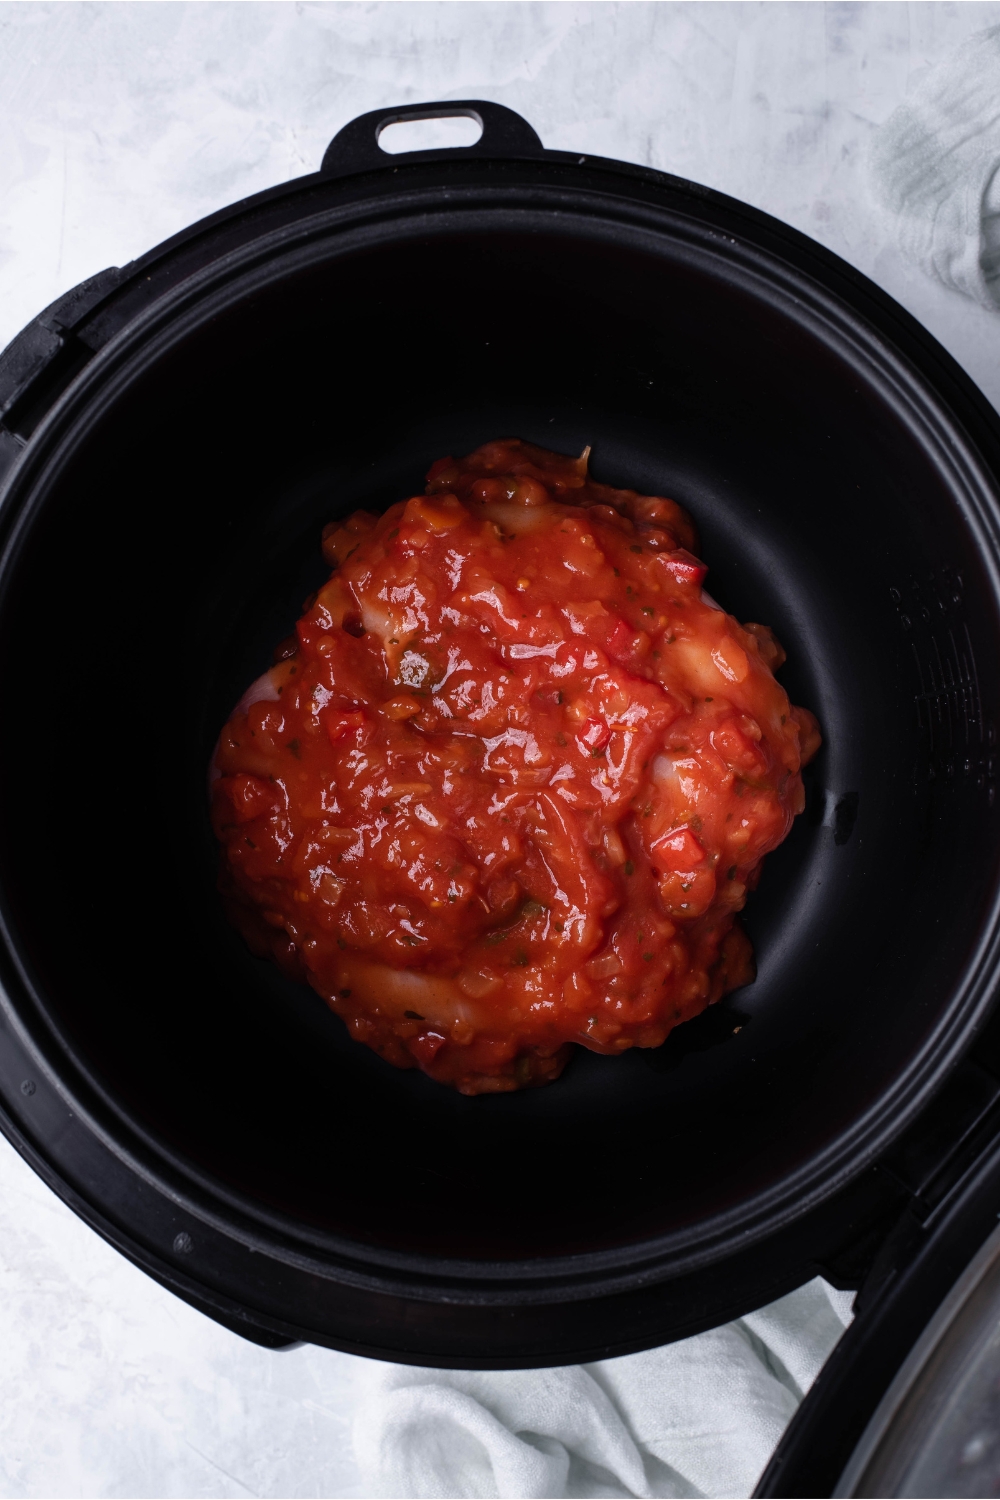 Slow cooker filled with raw chicken breasts that have been covered in salsa.